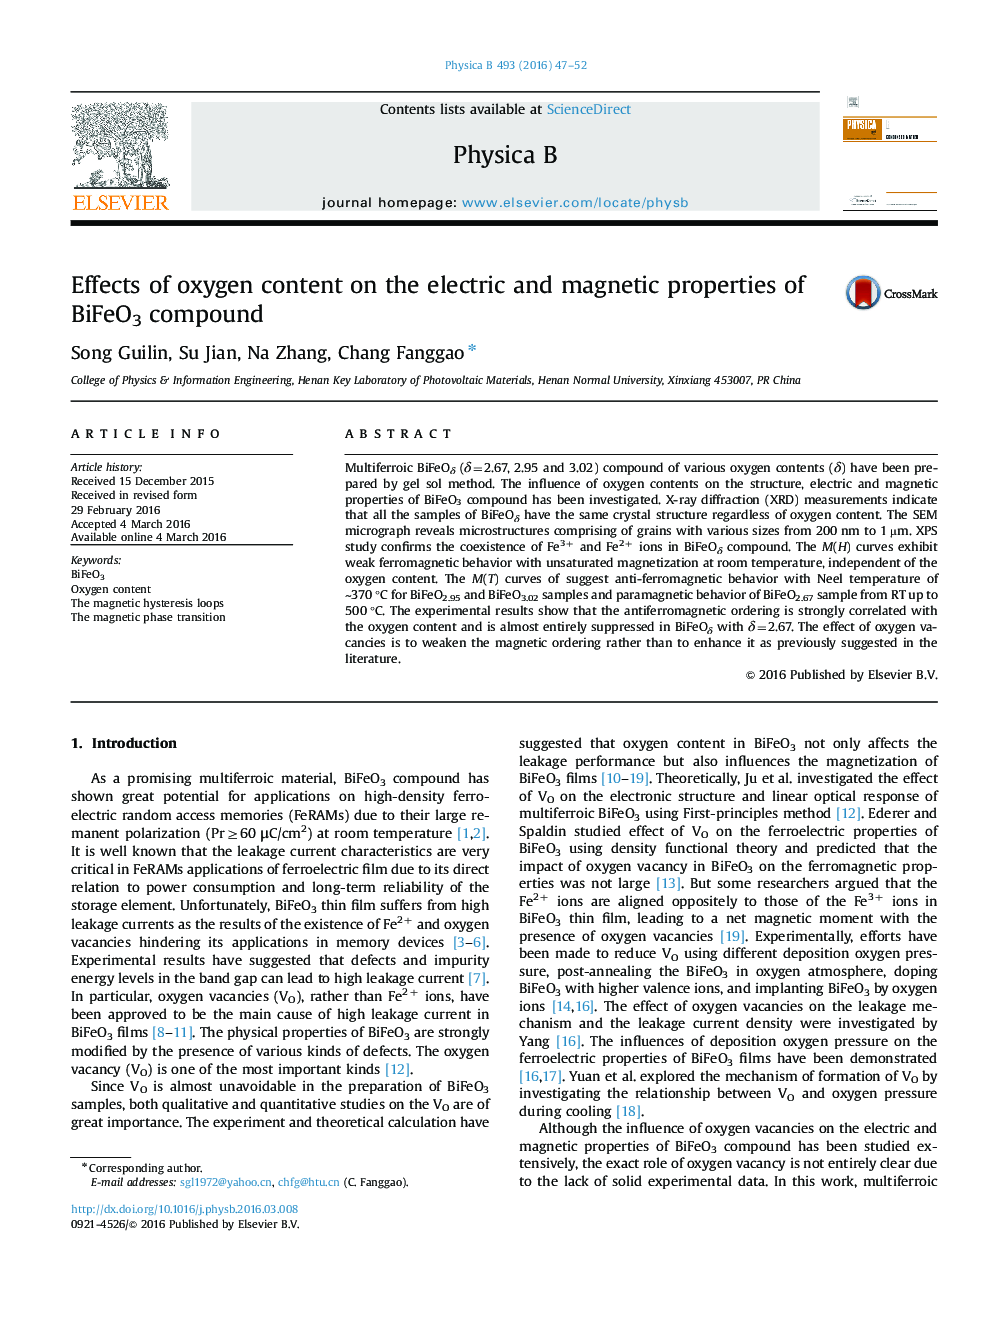 Effects of oxygen content on the electric and magnetic properties of BiFeO3 compound